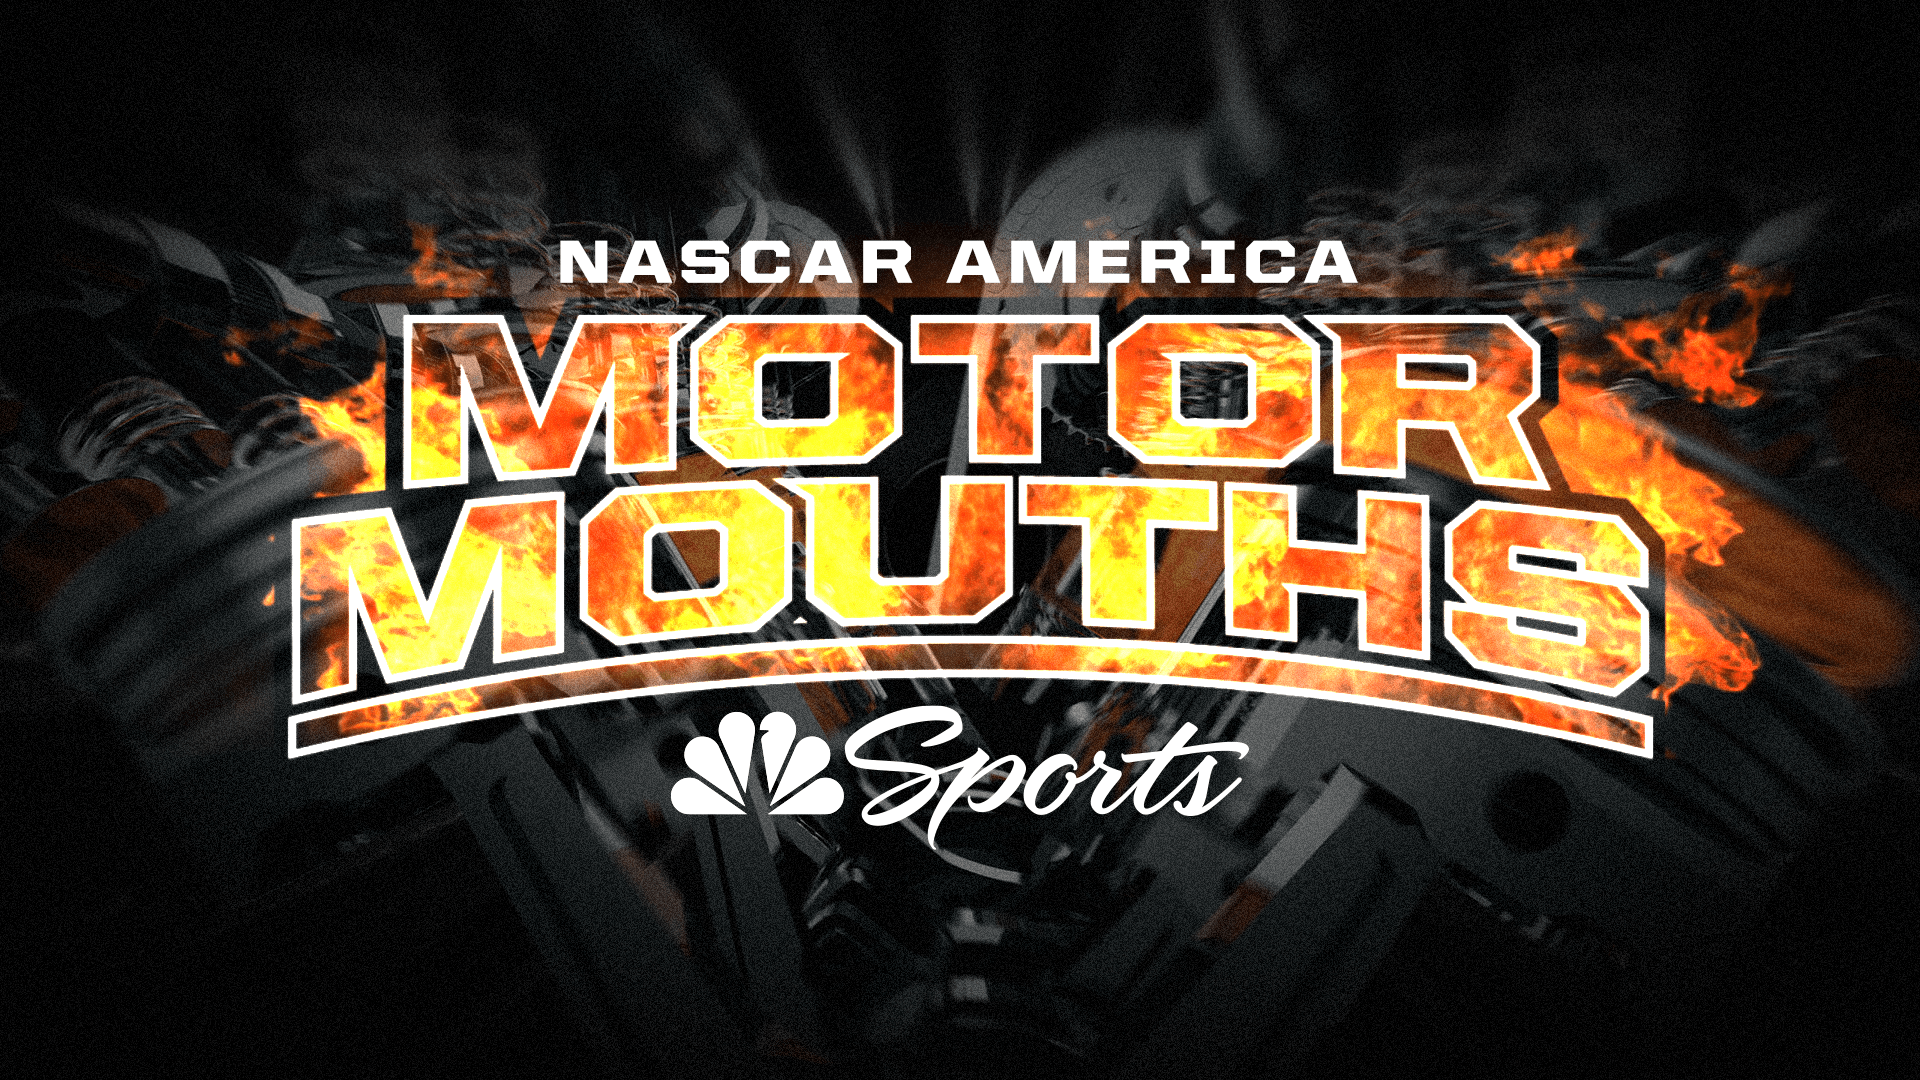 Peacock Adds NASCAR Content with ‘NASCAR America Motormouths’ Starting Today